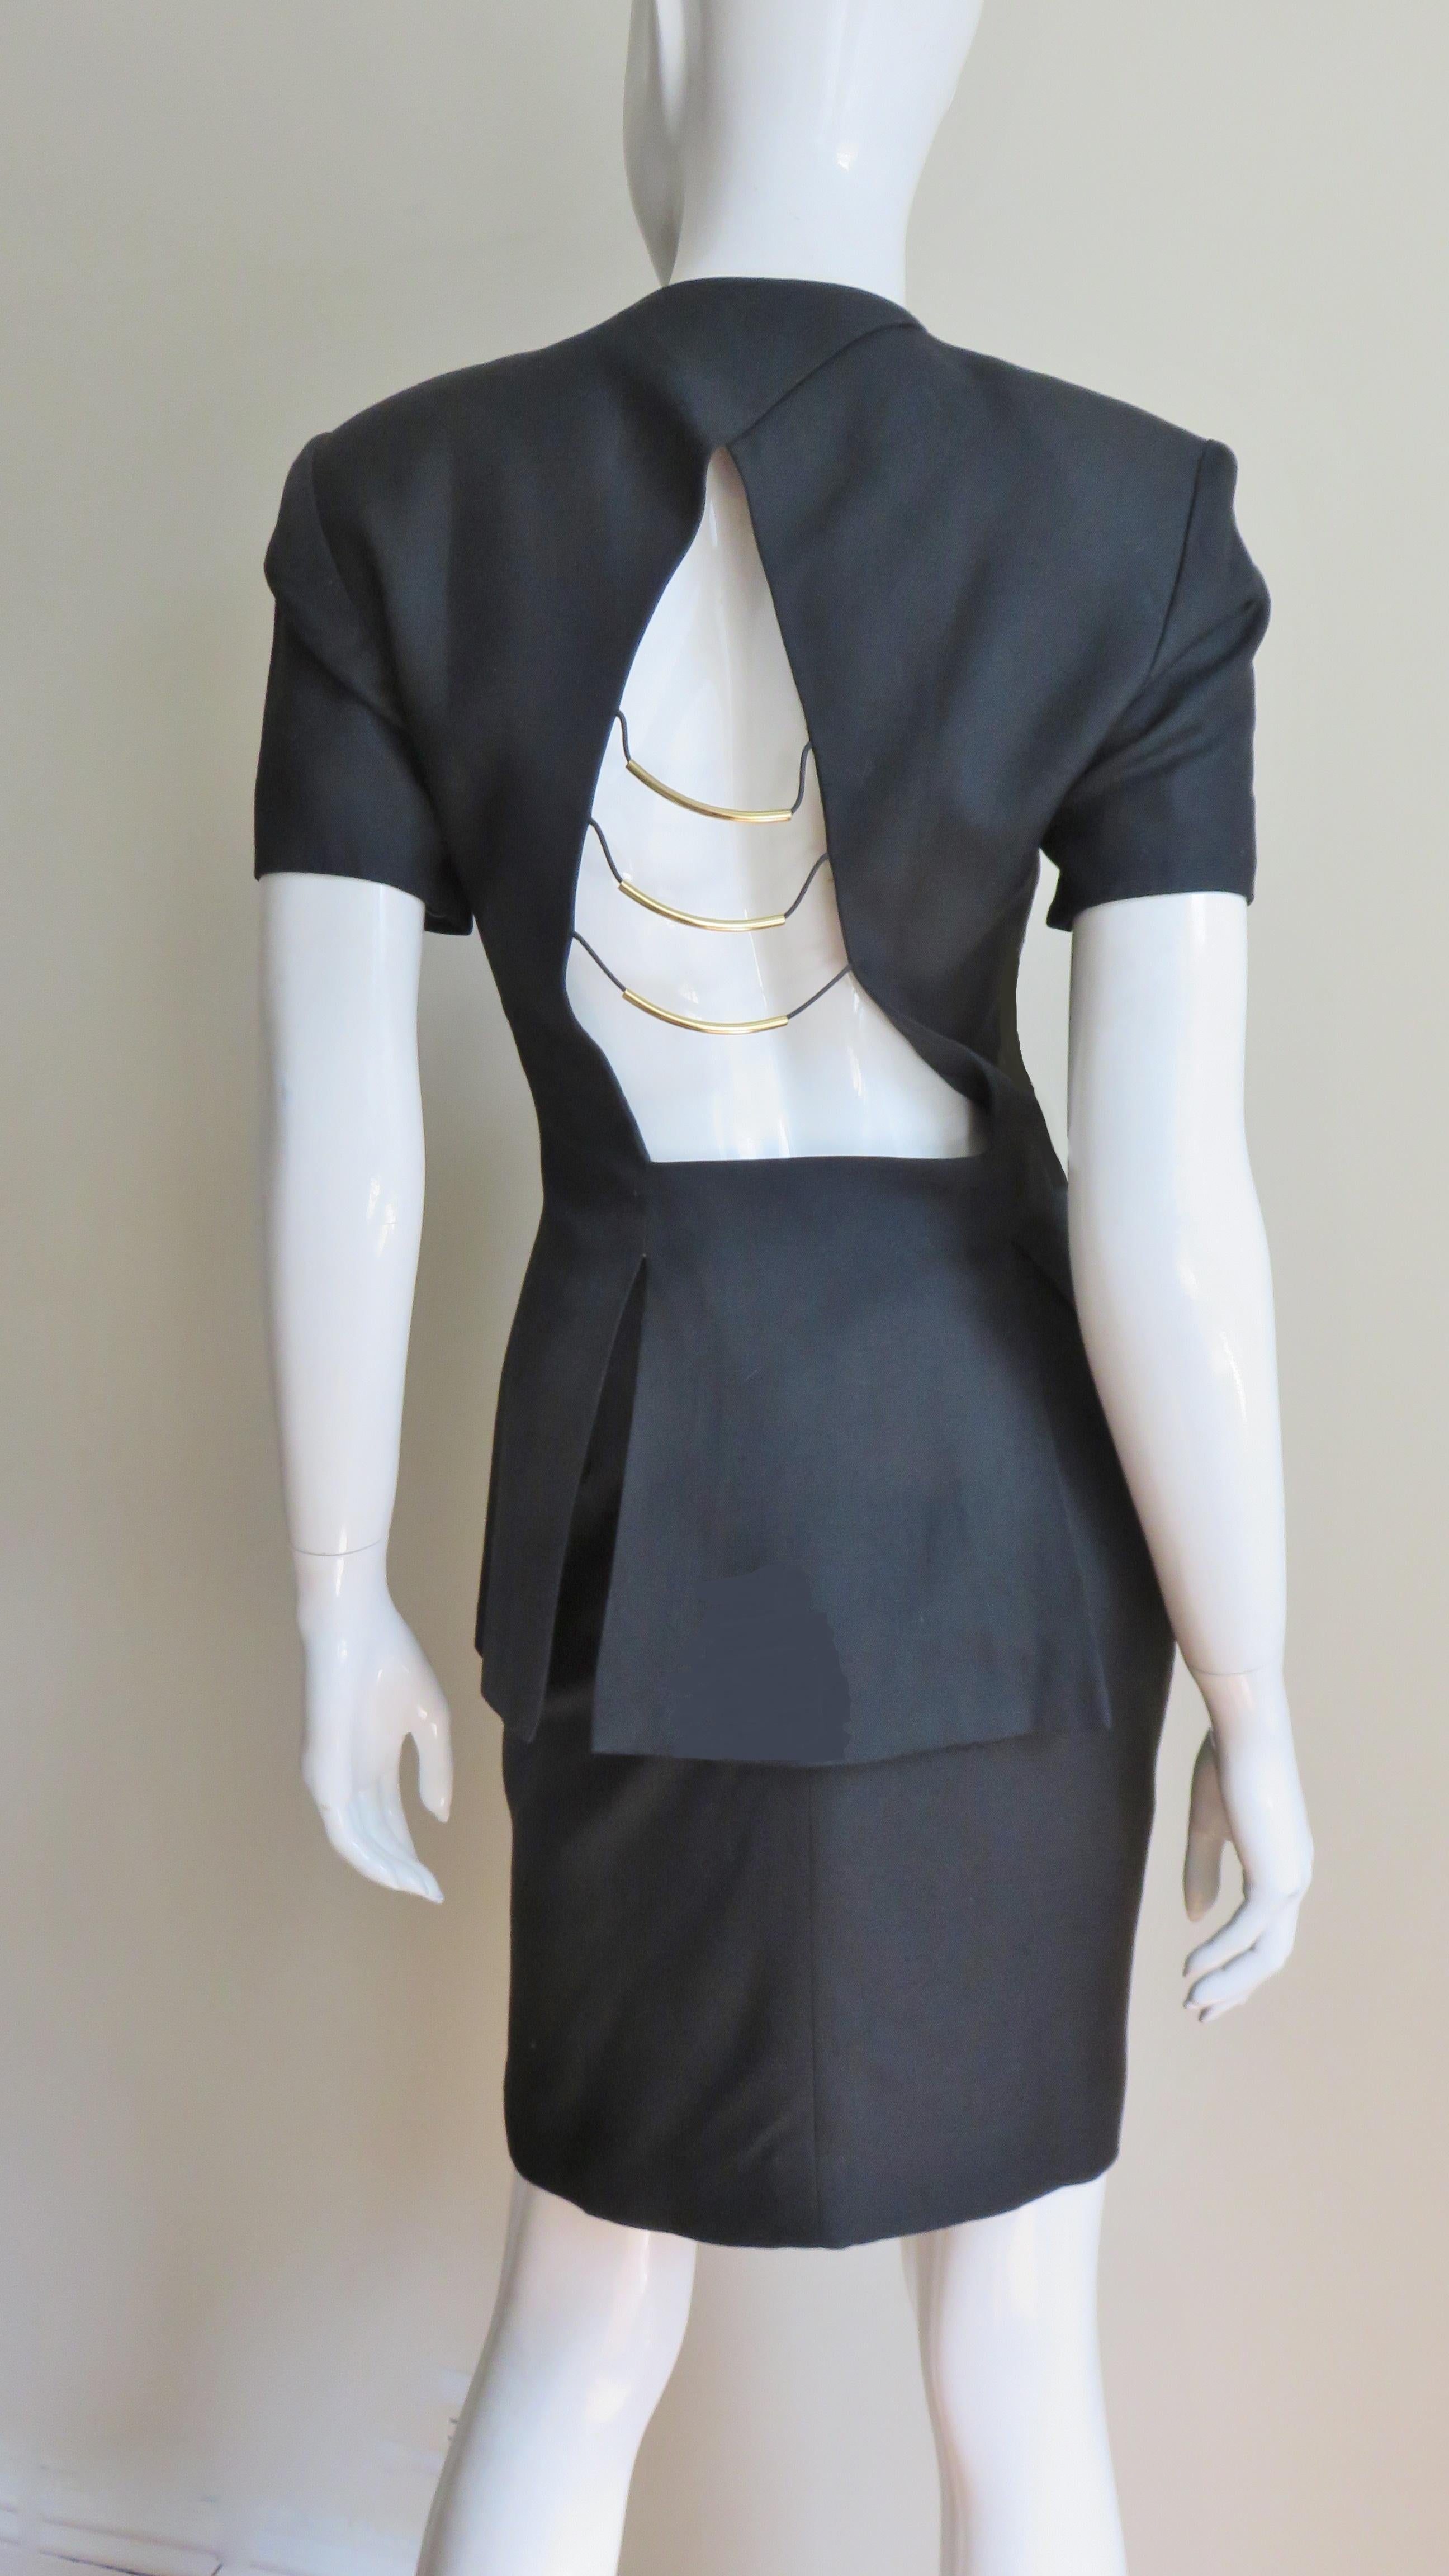 Gianfranco Ferre Skirt Suit with Cut out Jacket 4